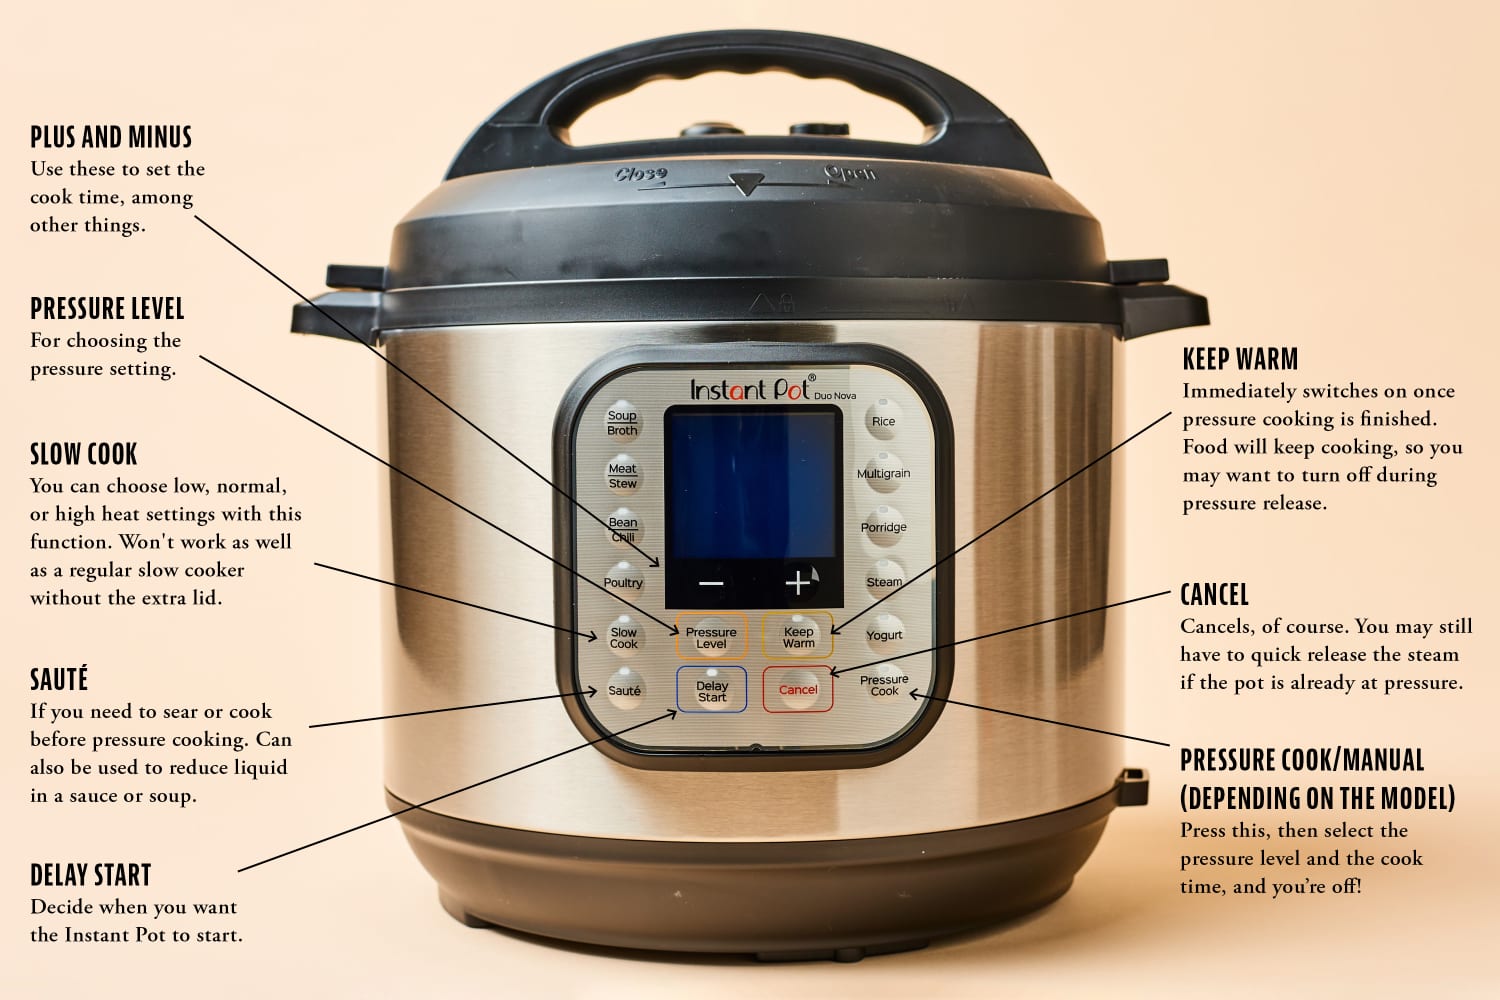 Getting Started: How to Use an Instant Pot or Electric Pressure Cooker